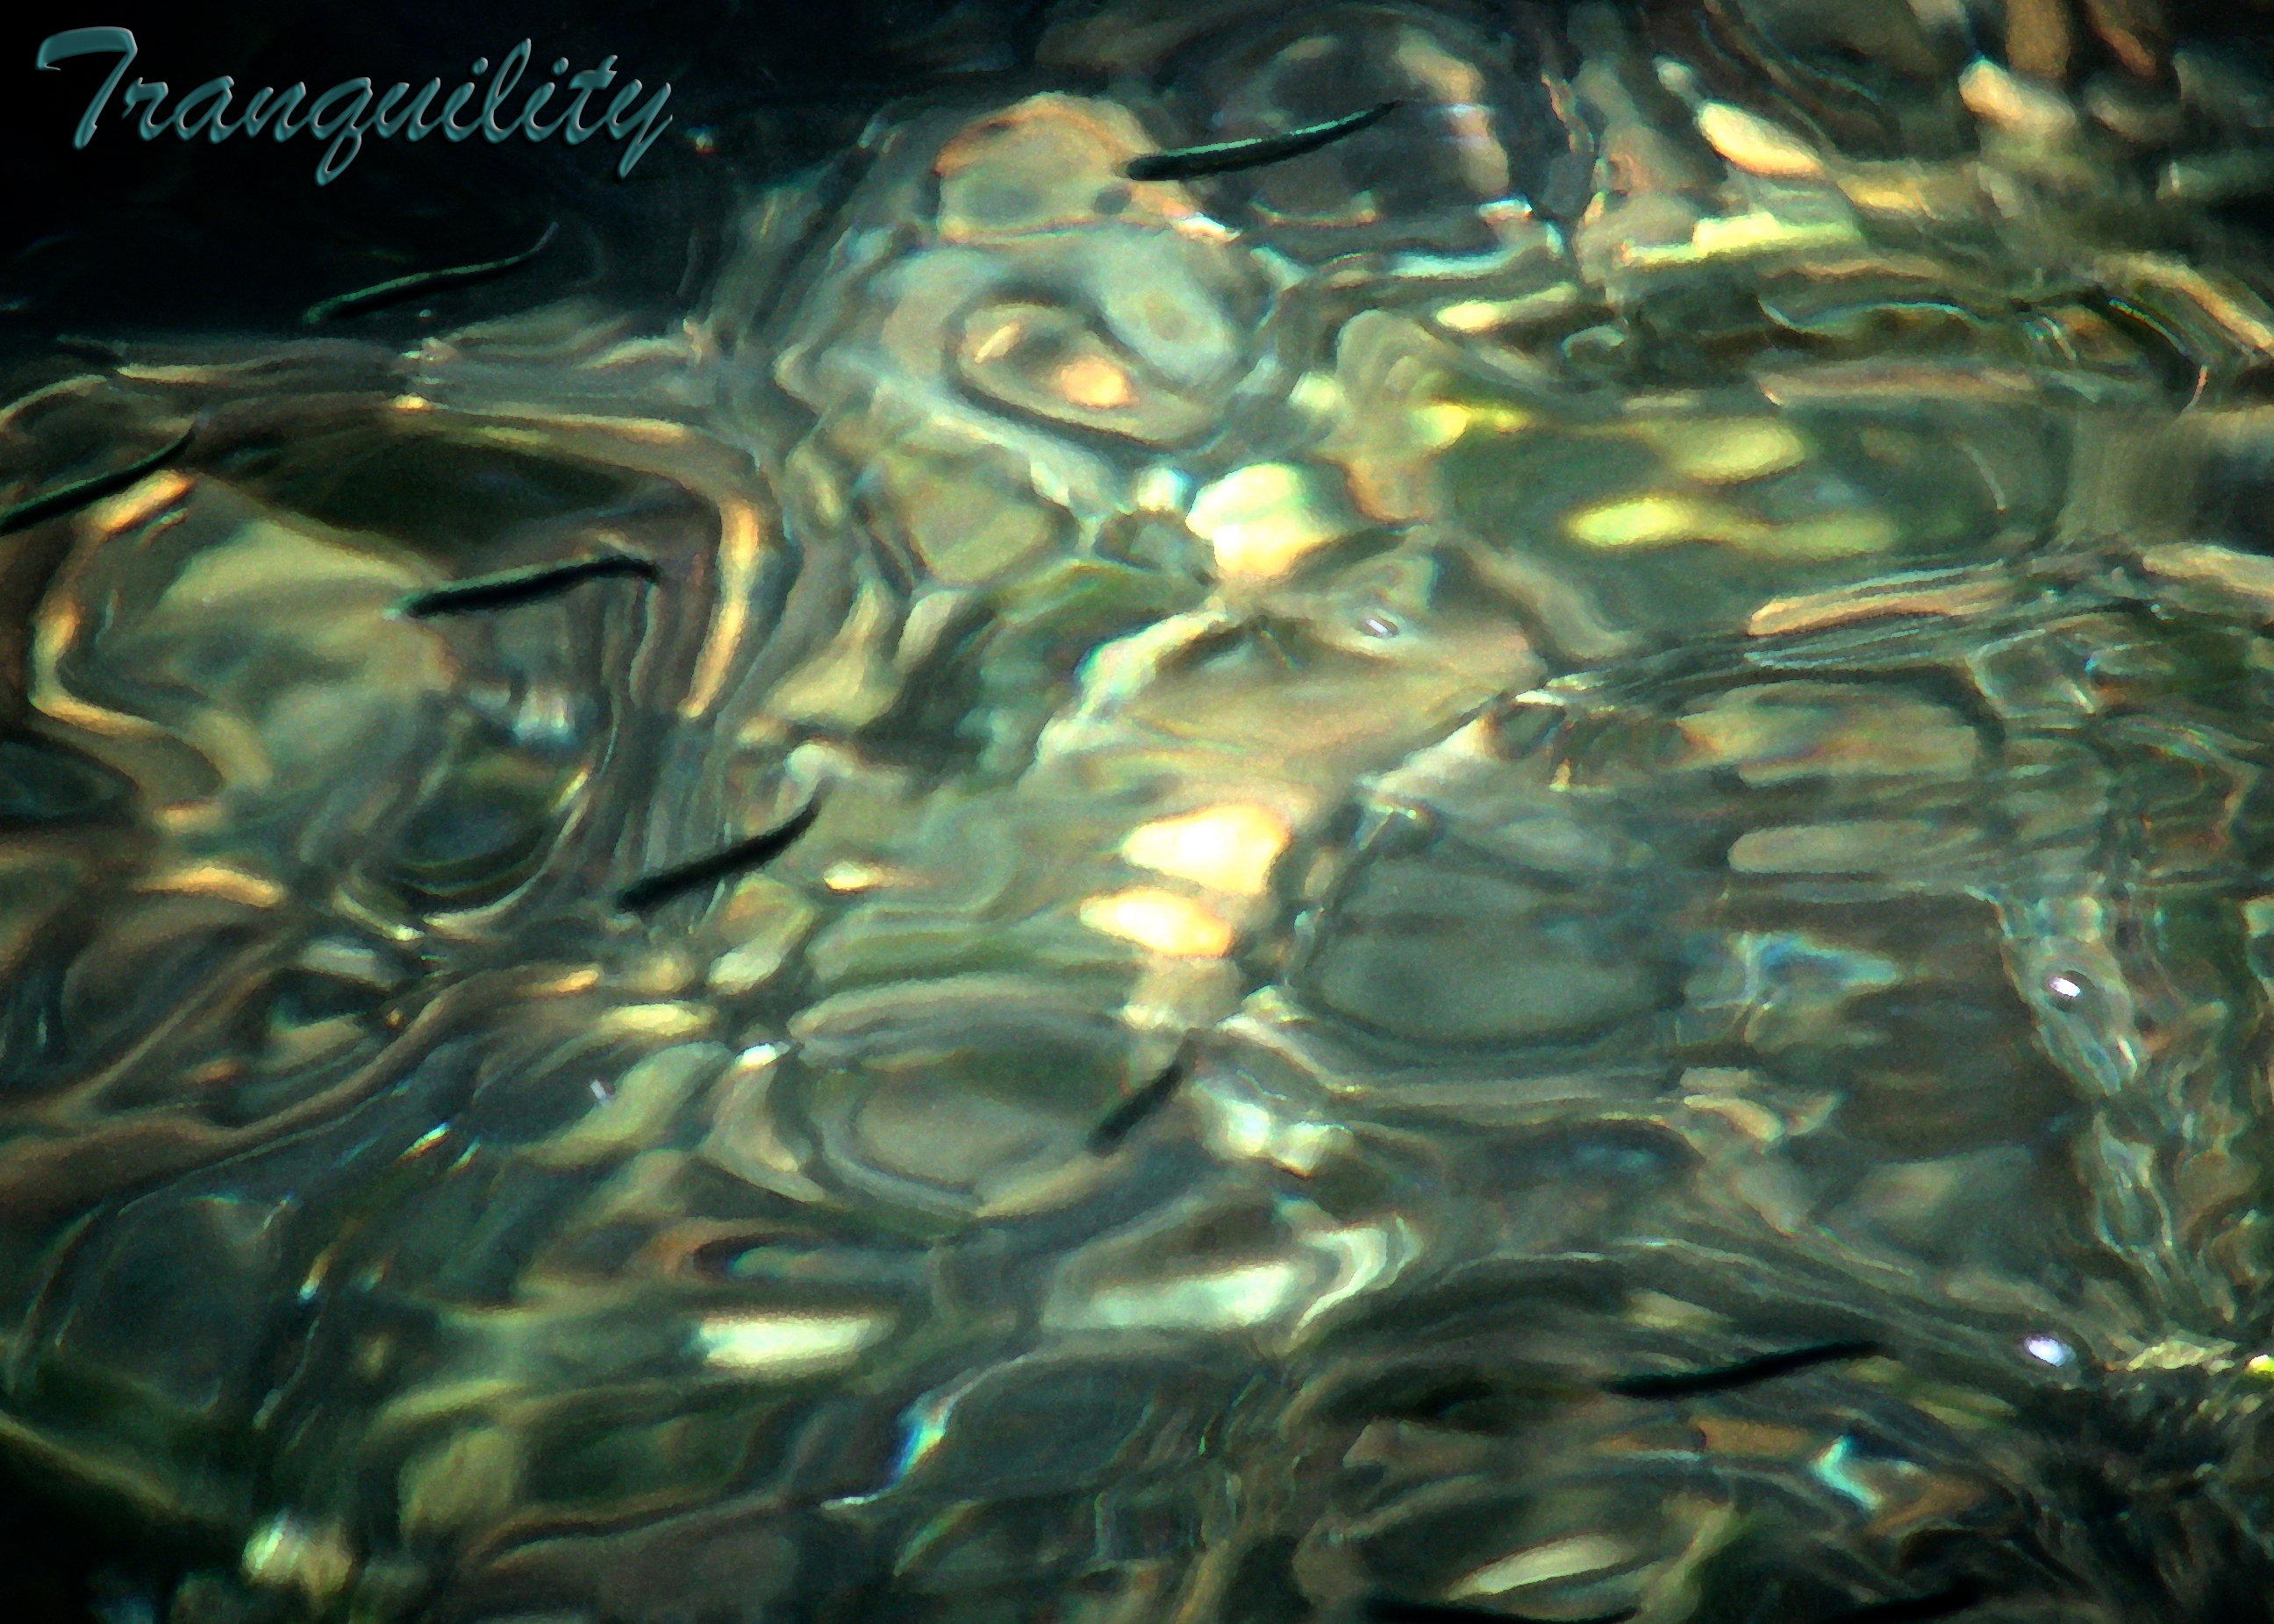 Traquility of fish image.